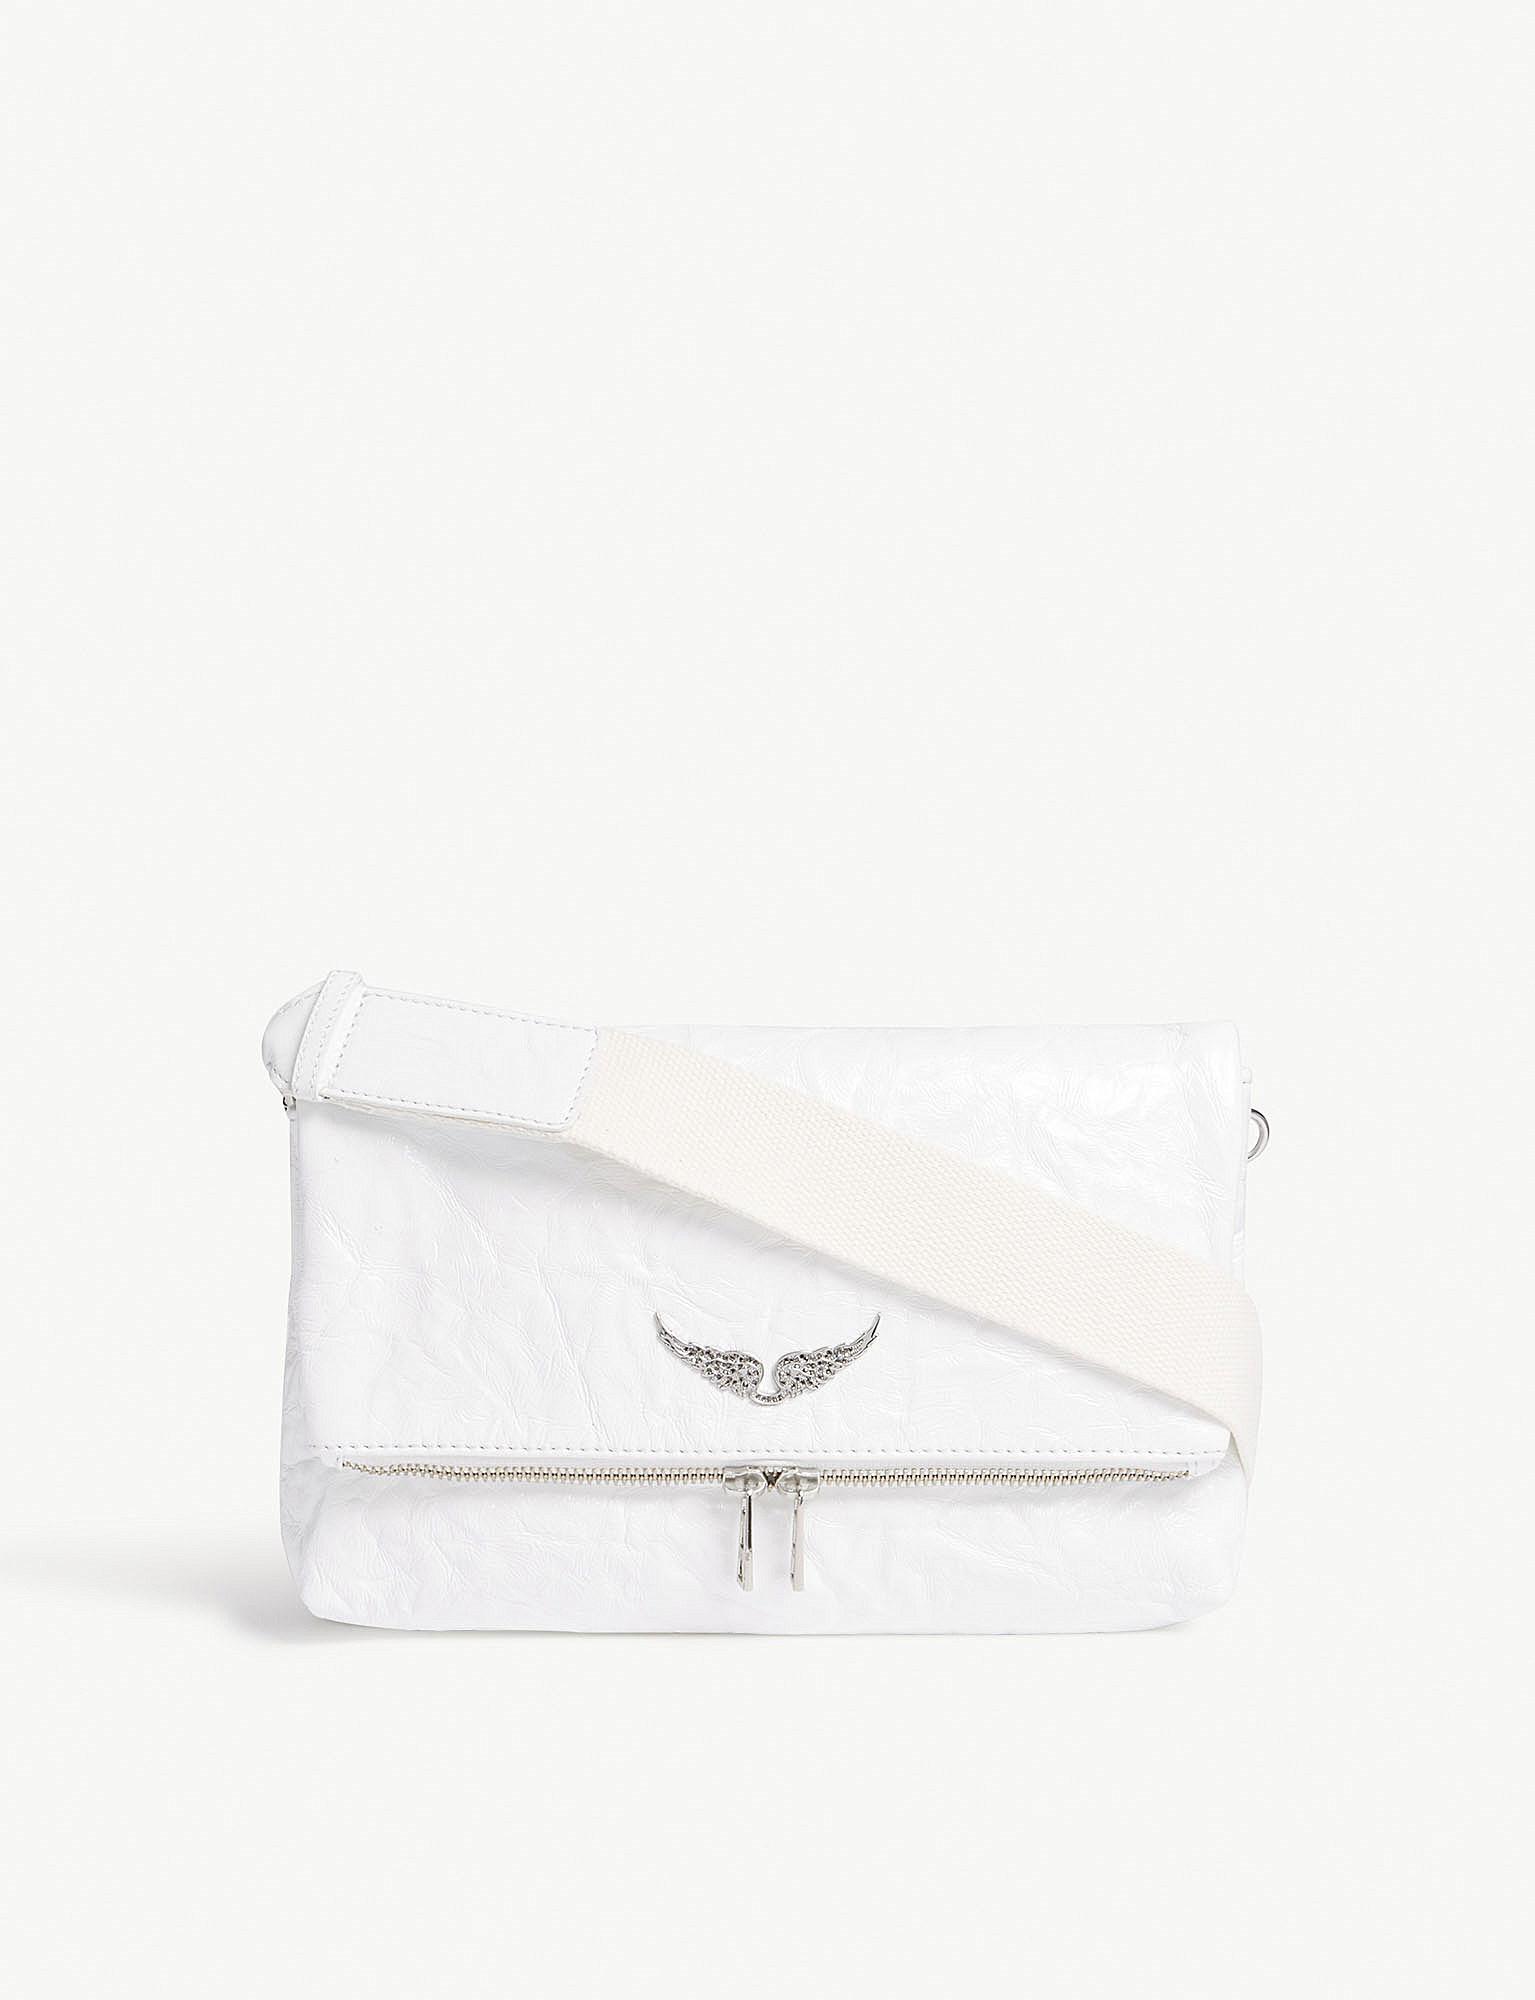 Zadig & Voltaire Rocky Creased Patent Leather Shoulder Bag in White ...